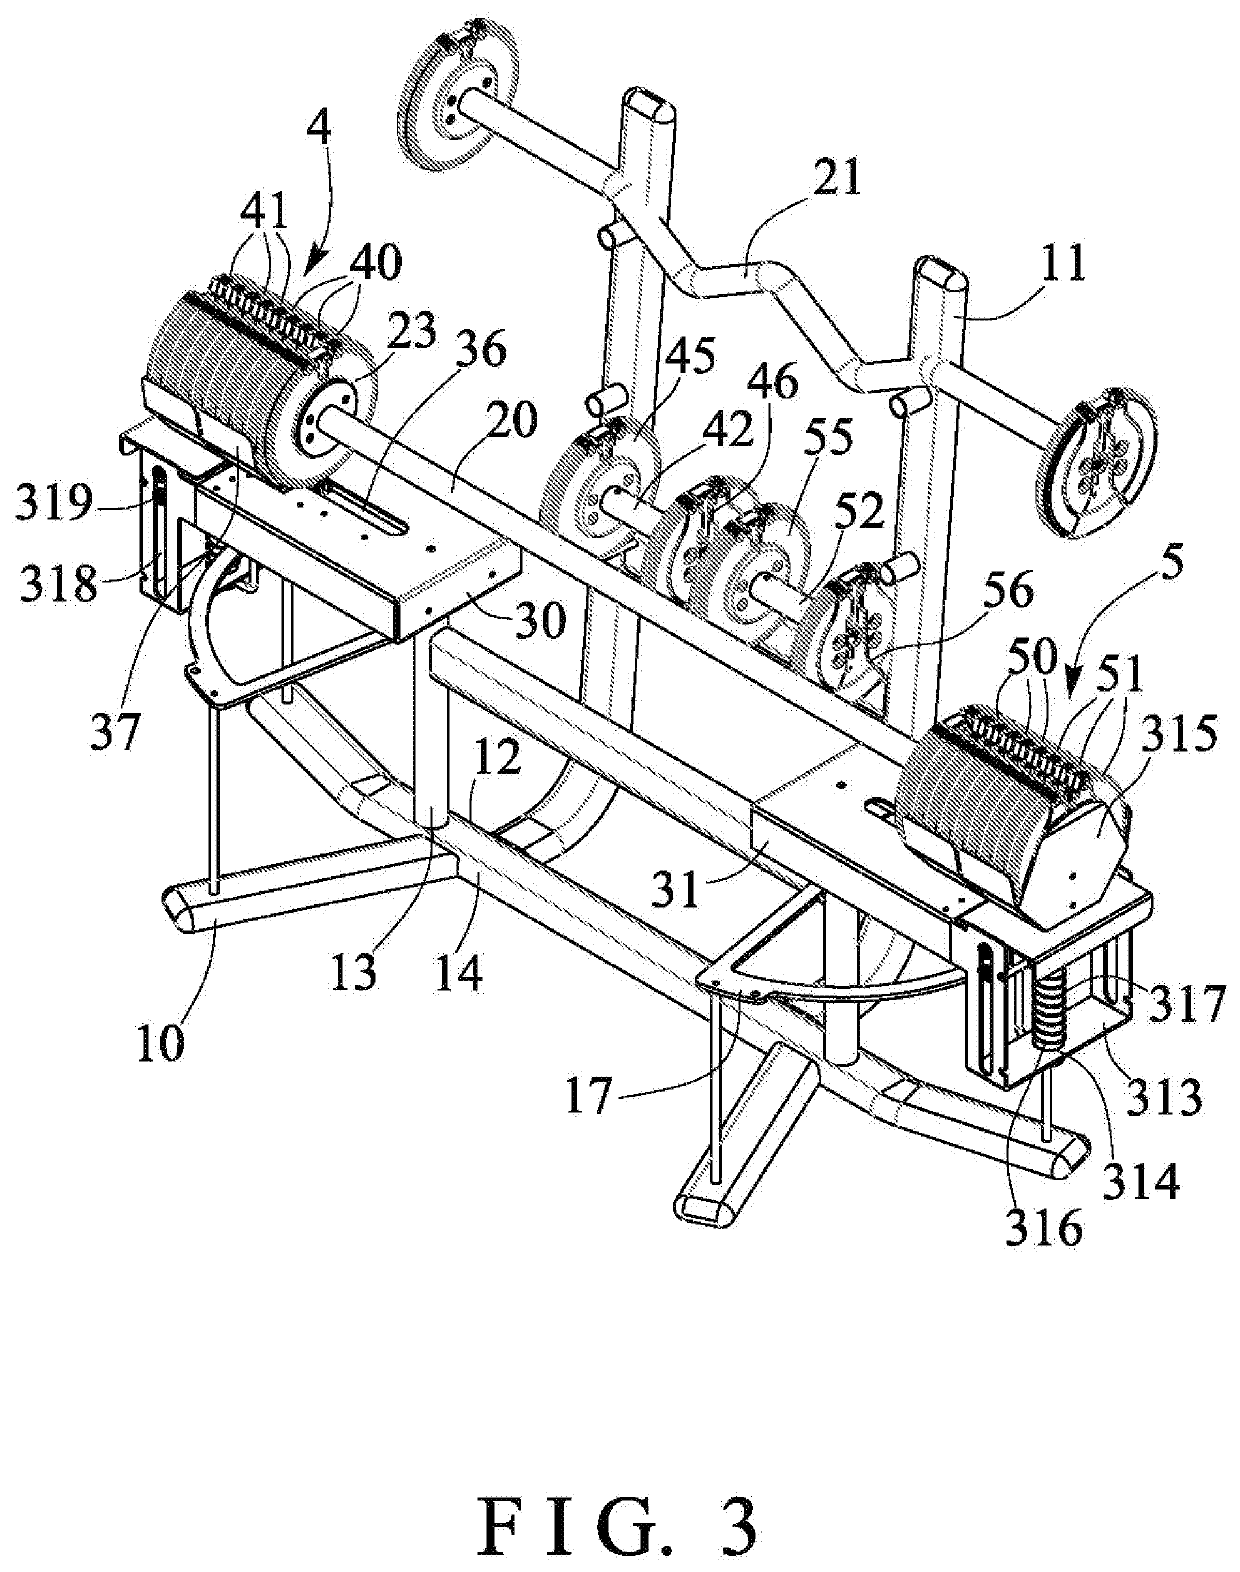 Dumbbell and barbell supporting system